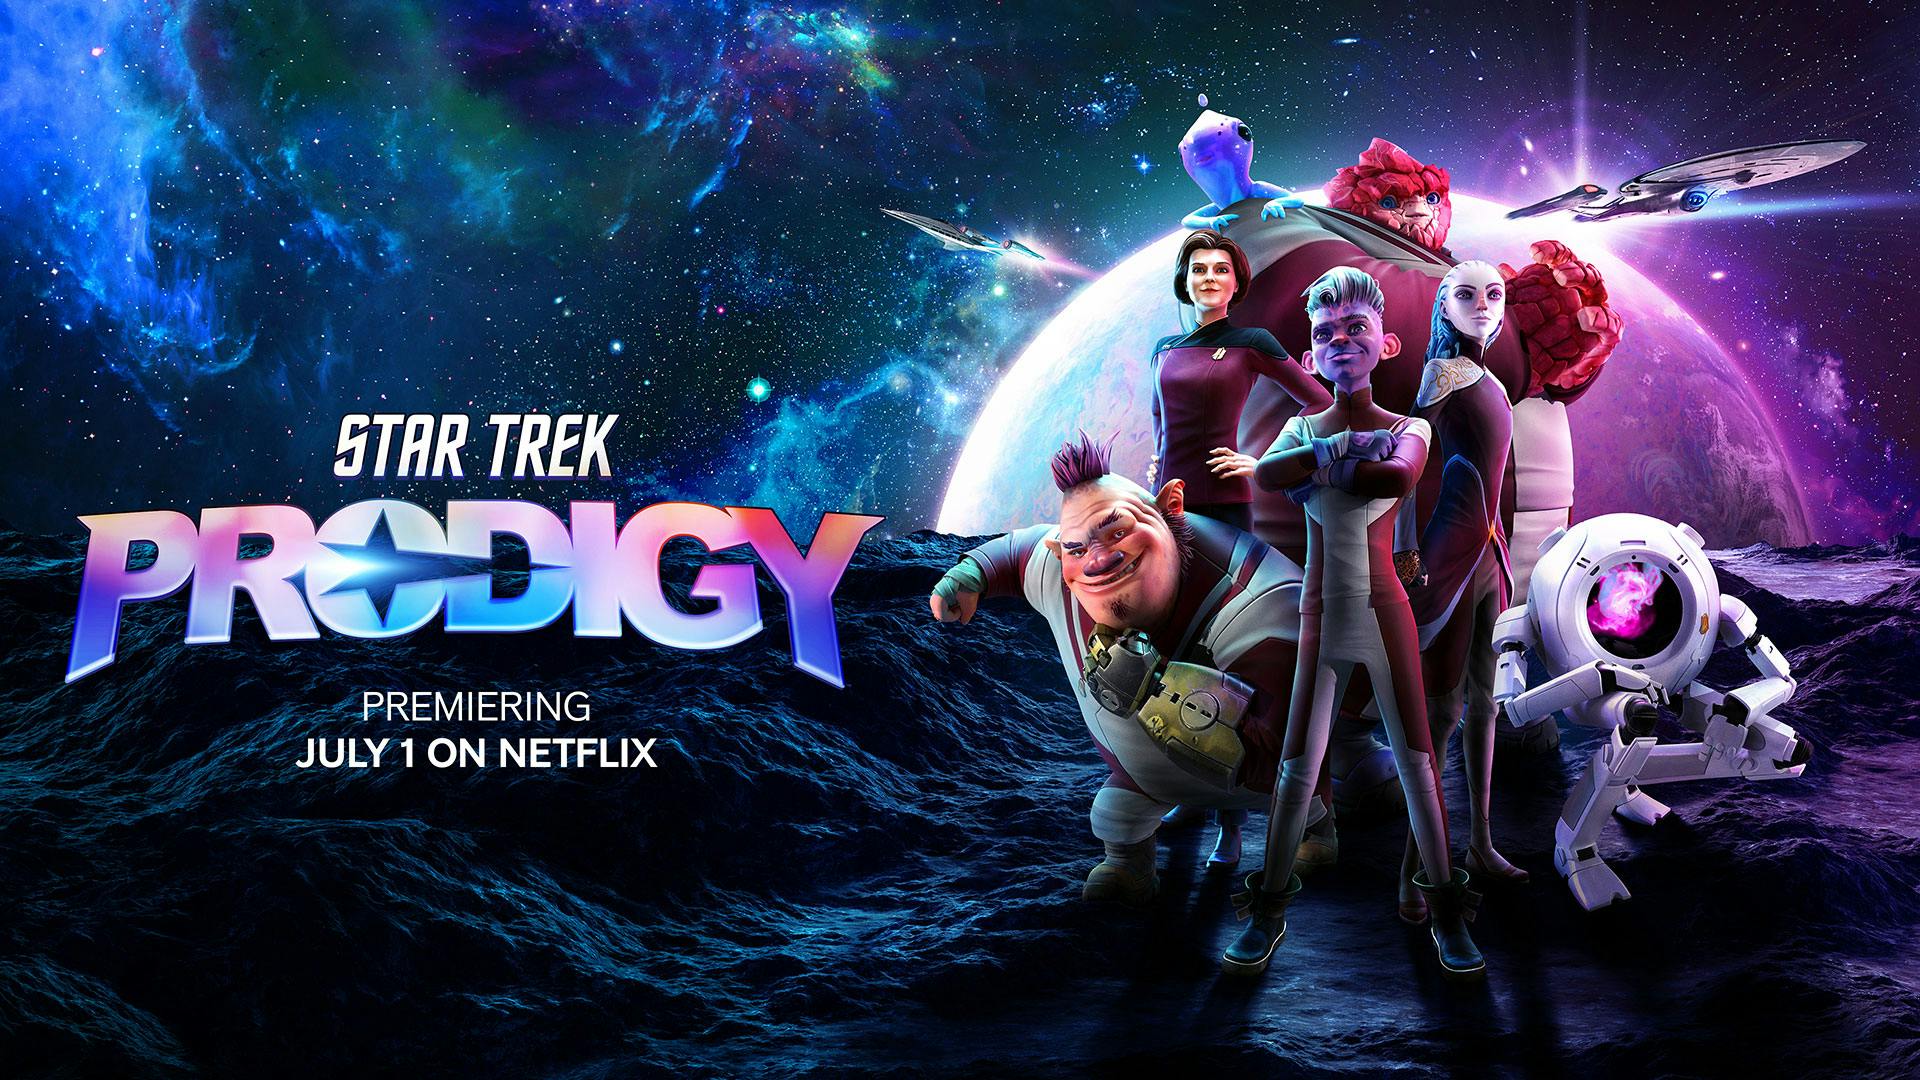 Season 2 Star Trek: Prodigy key art with Jankom Pog, Admiral Janeway, Murf, Rok-Tahk, Gwyn, and Zero crowded together on the surface of a planet